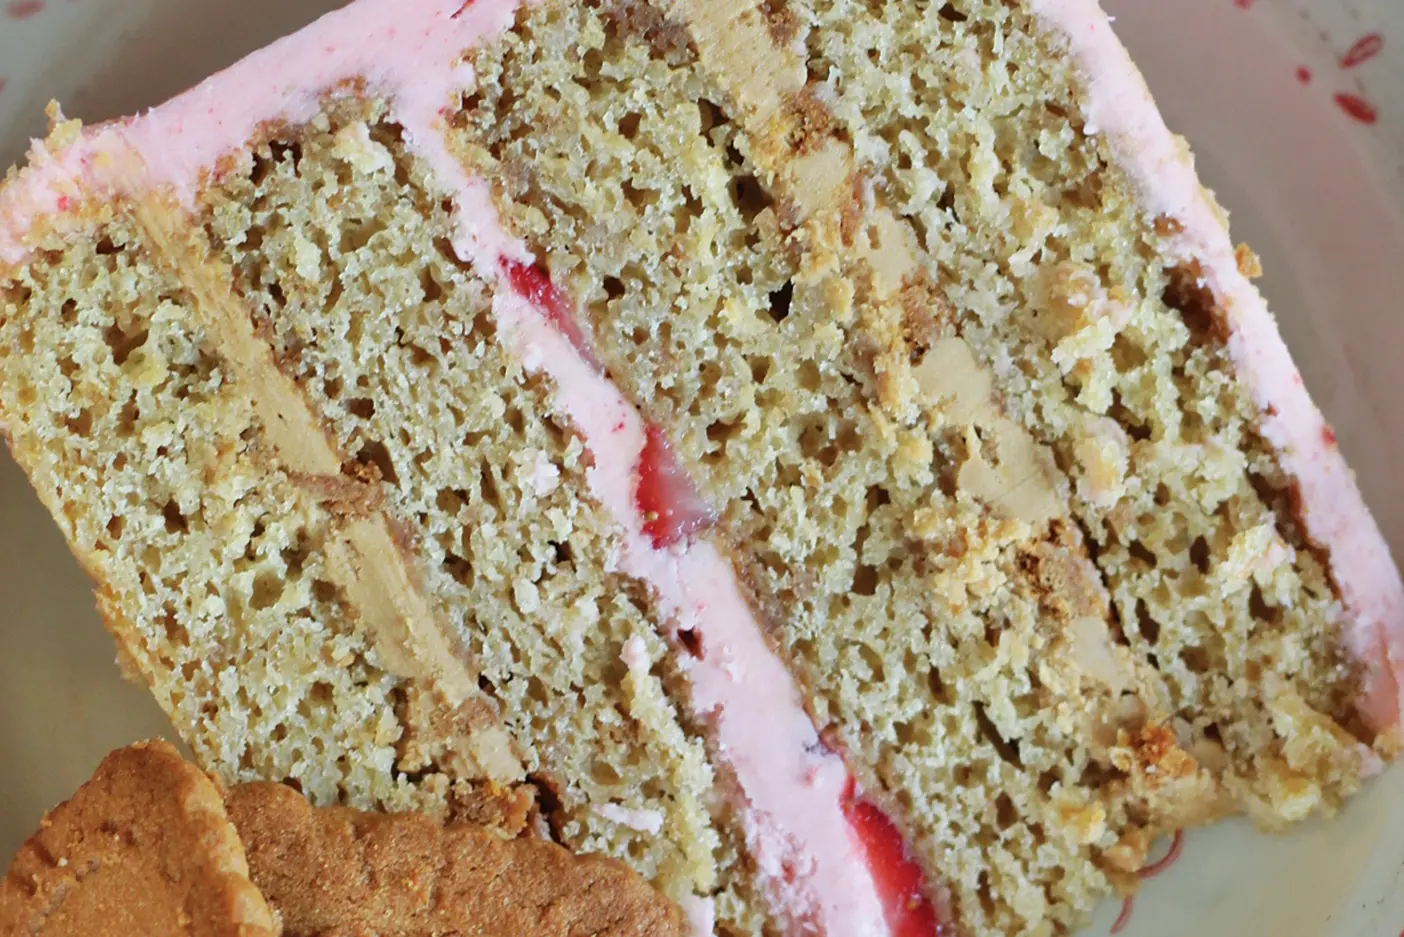 A slice of biscoff strawberry cake with pink frosting and multiple layers.